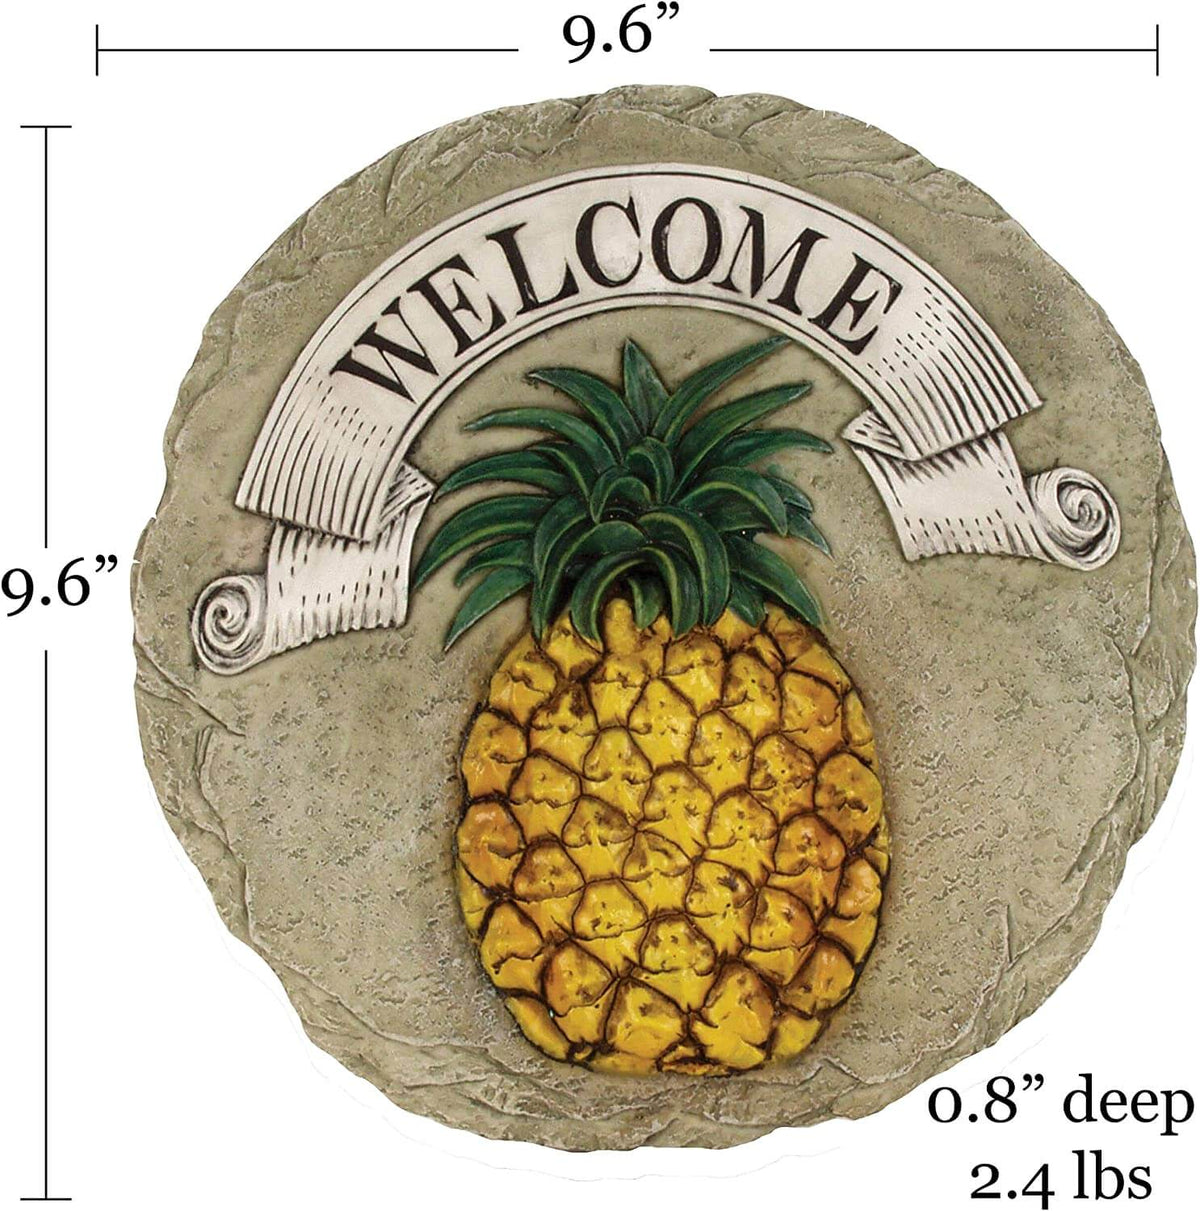  Pineapple Welcome Stepping Stone - The House of Awareness